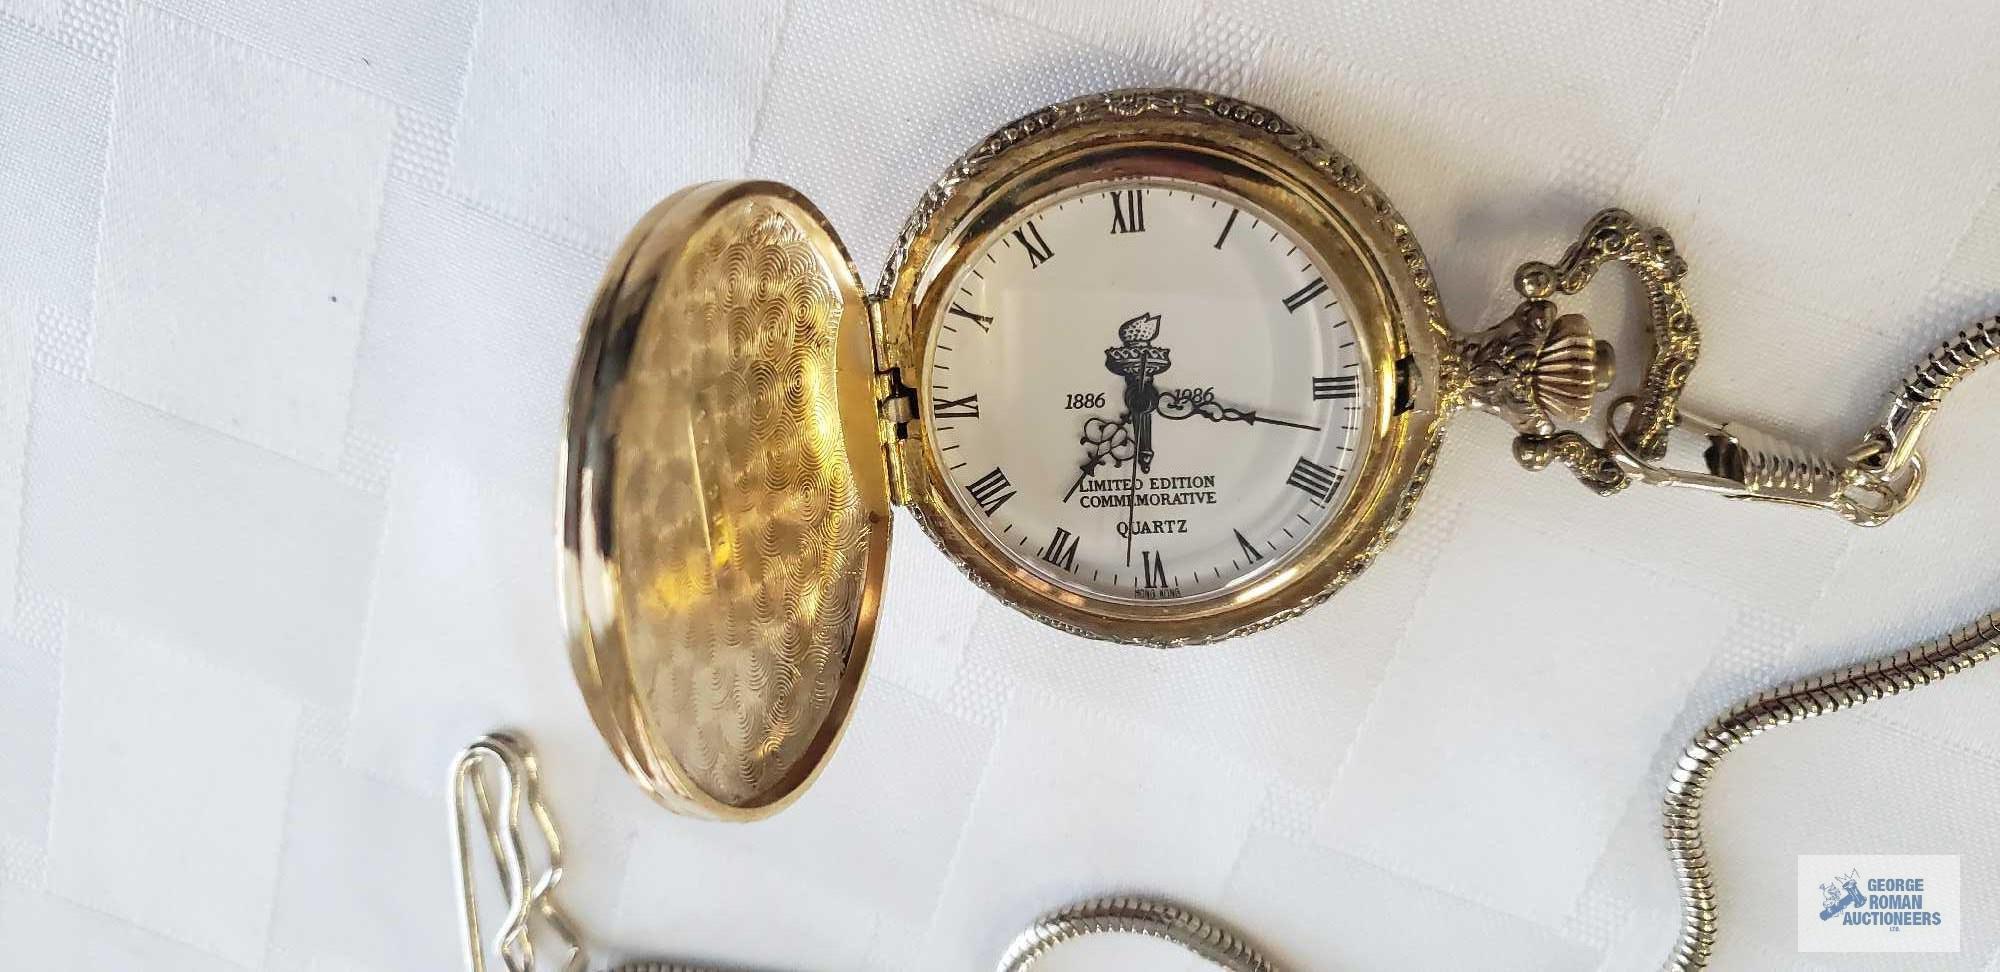 Limited edition commemorative Statue of Liberty pocket watch with certificate of authenticity